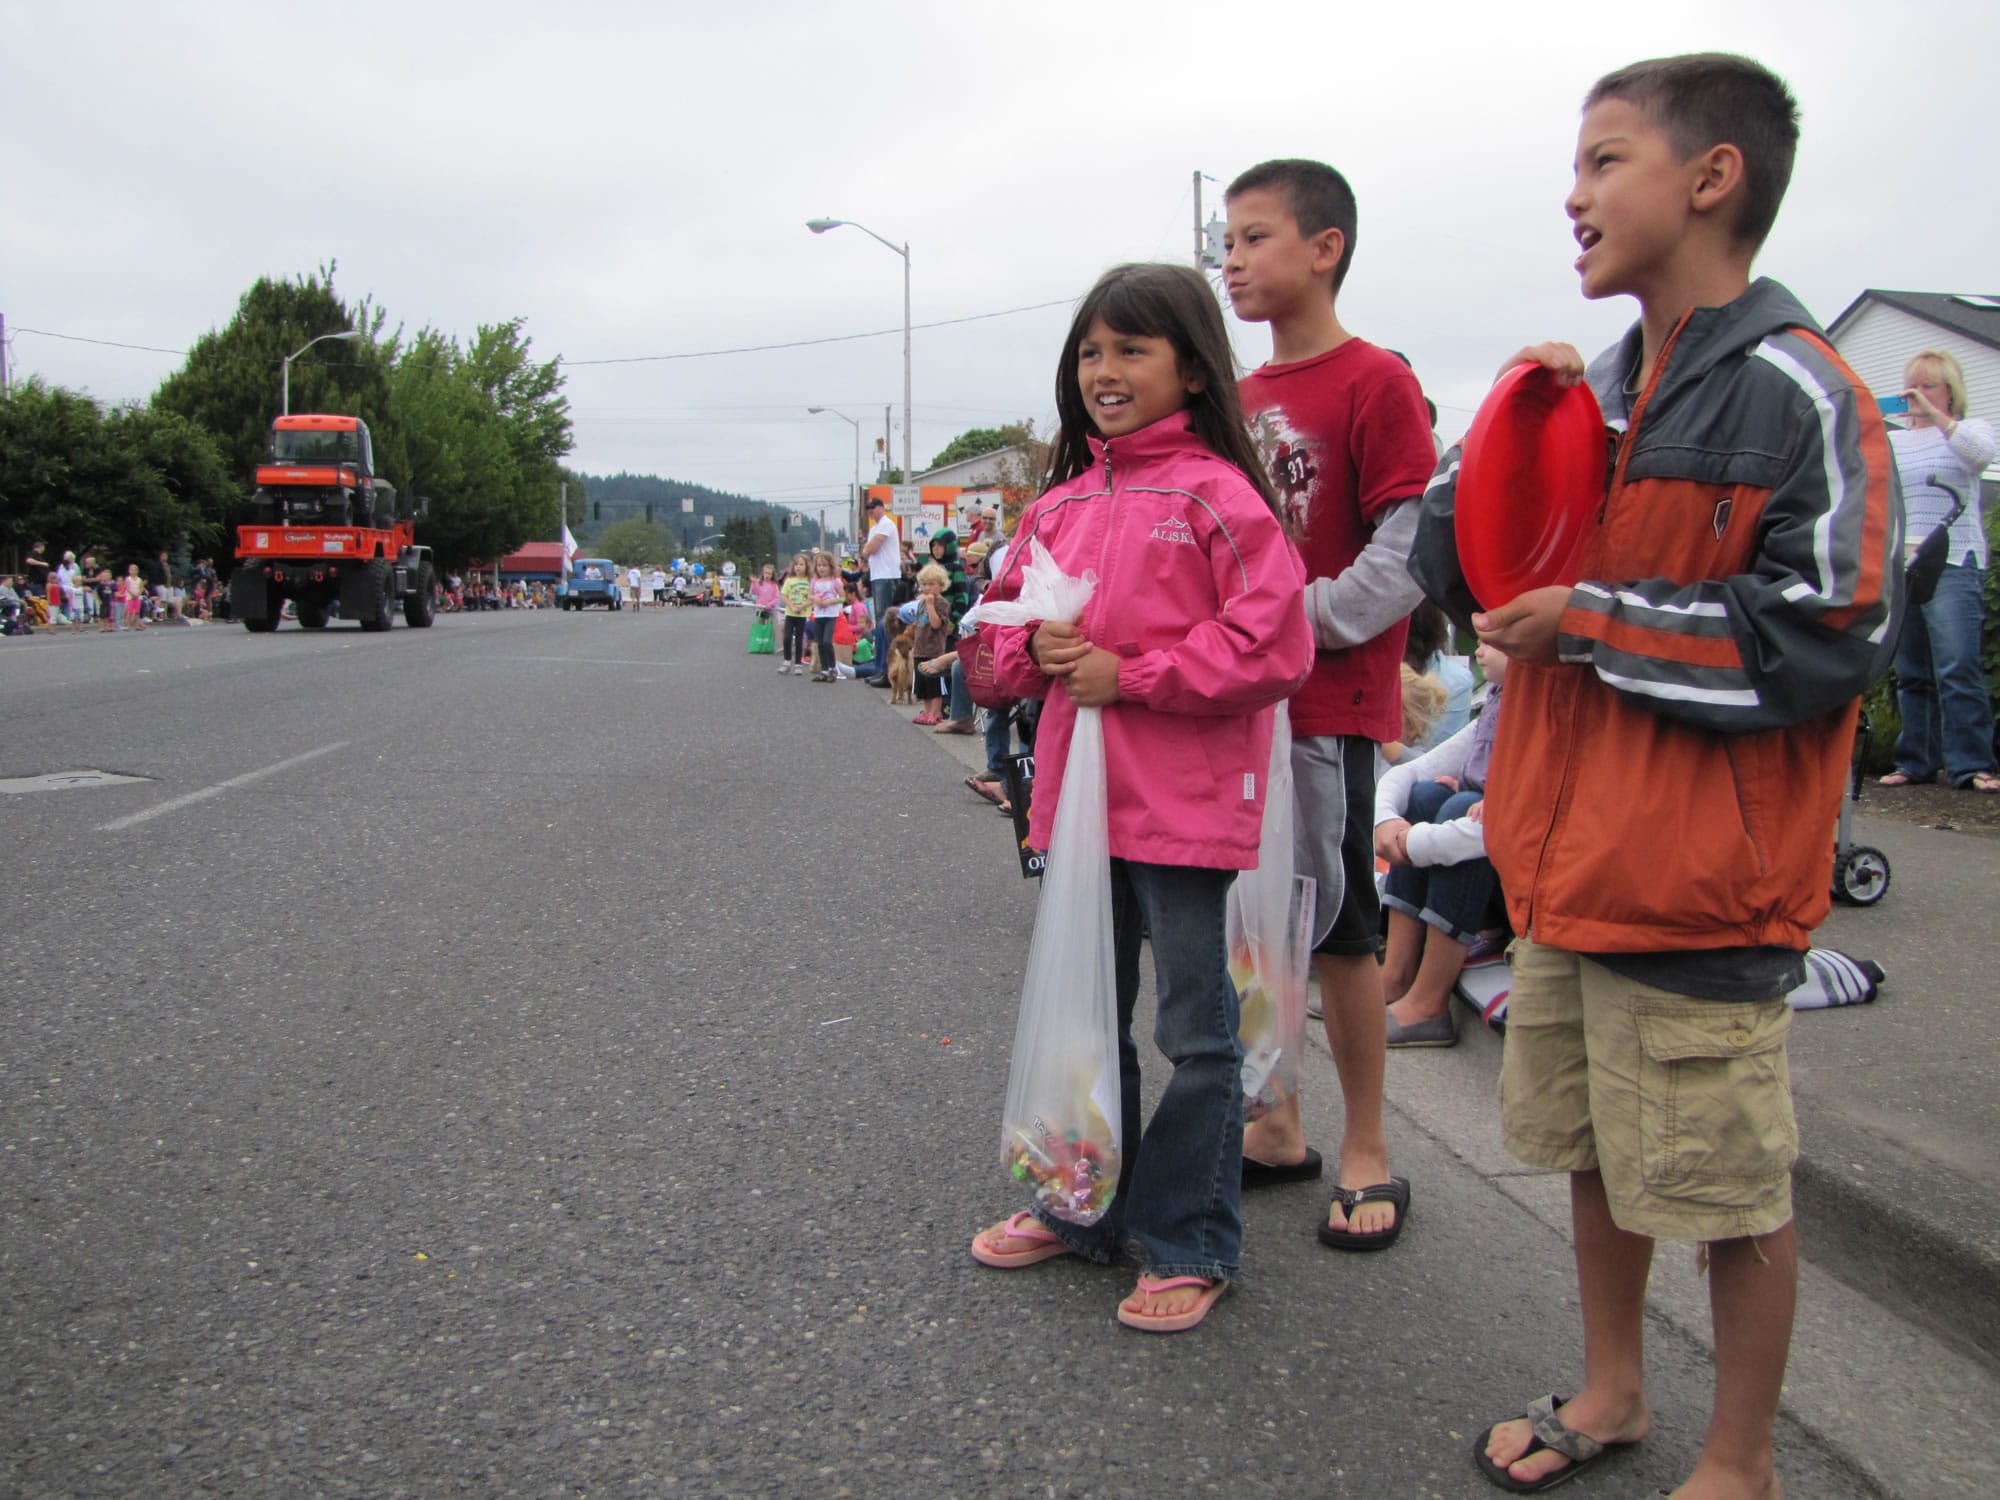 From left, Kendra, Richie and Tommy Azbill wait for candy at the Harvest Days parade July 20.